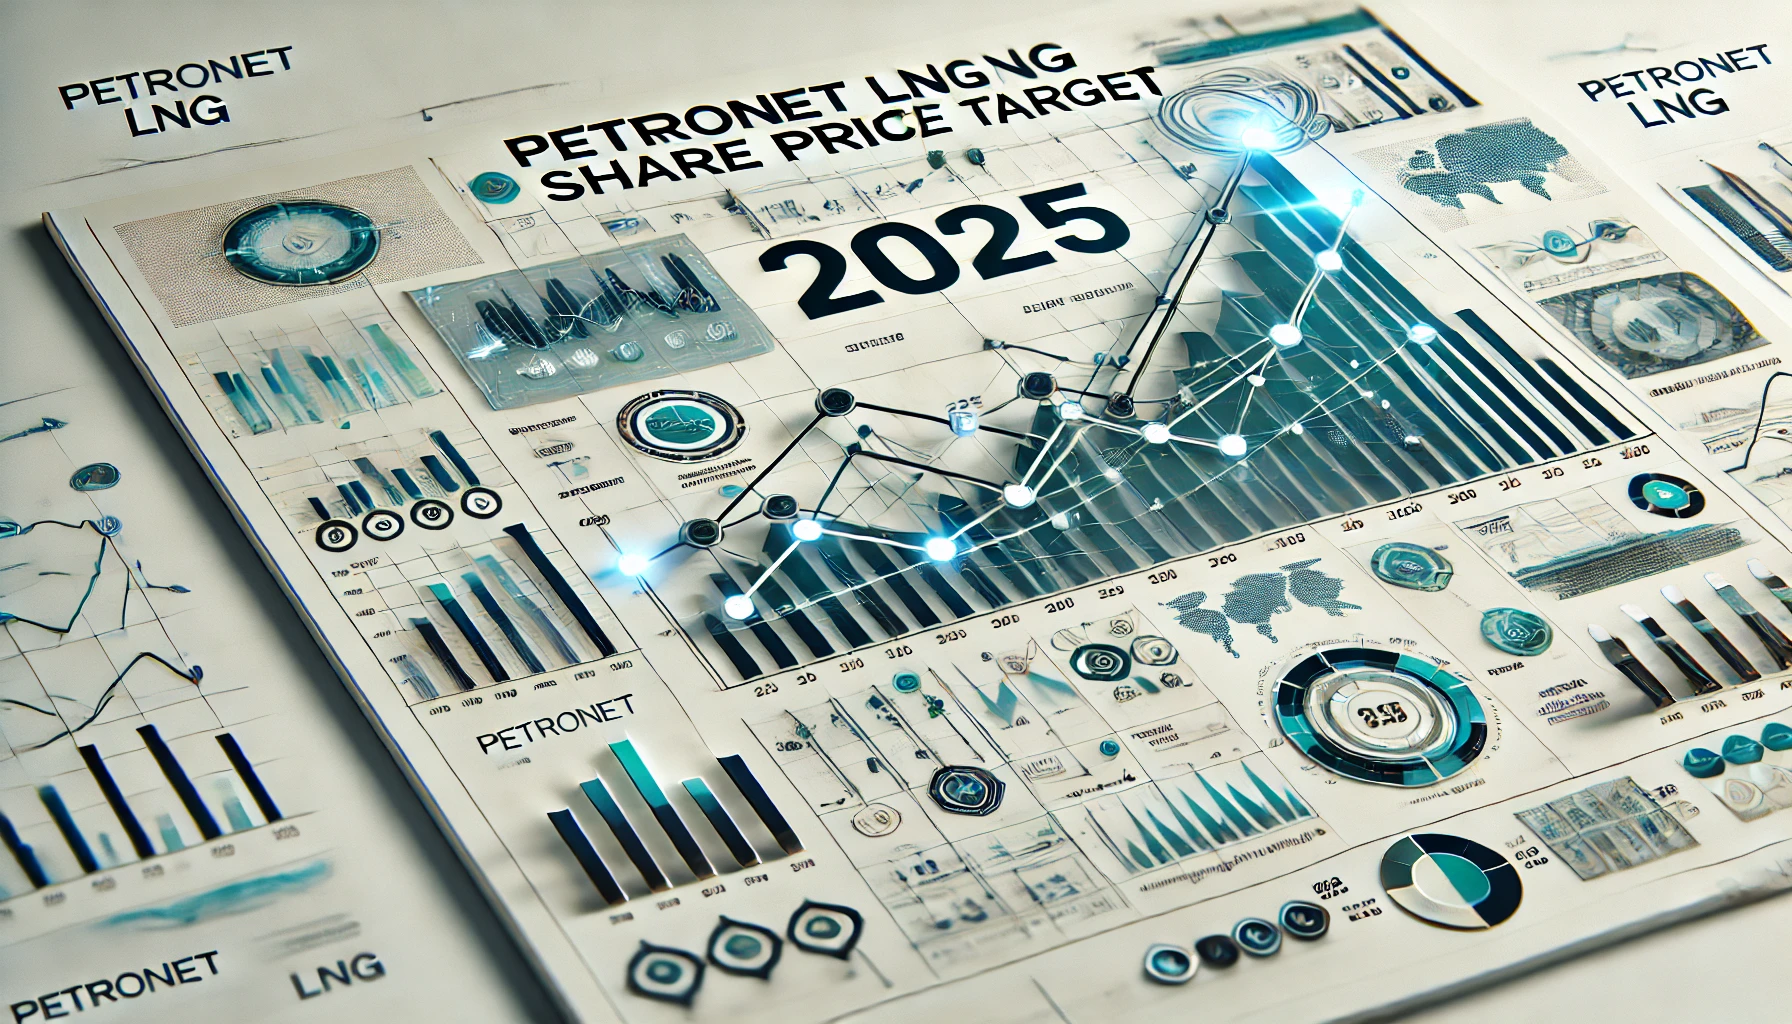 Petronet LNG Share Price Target 2025